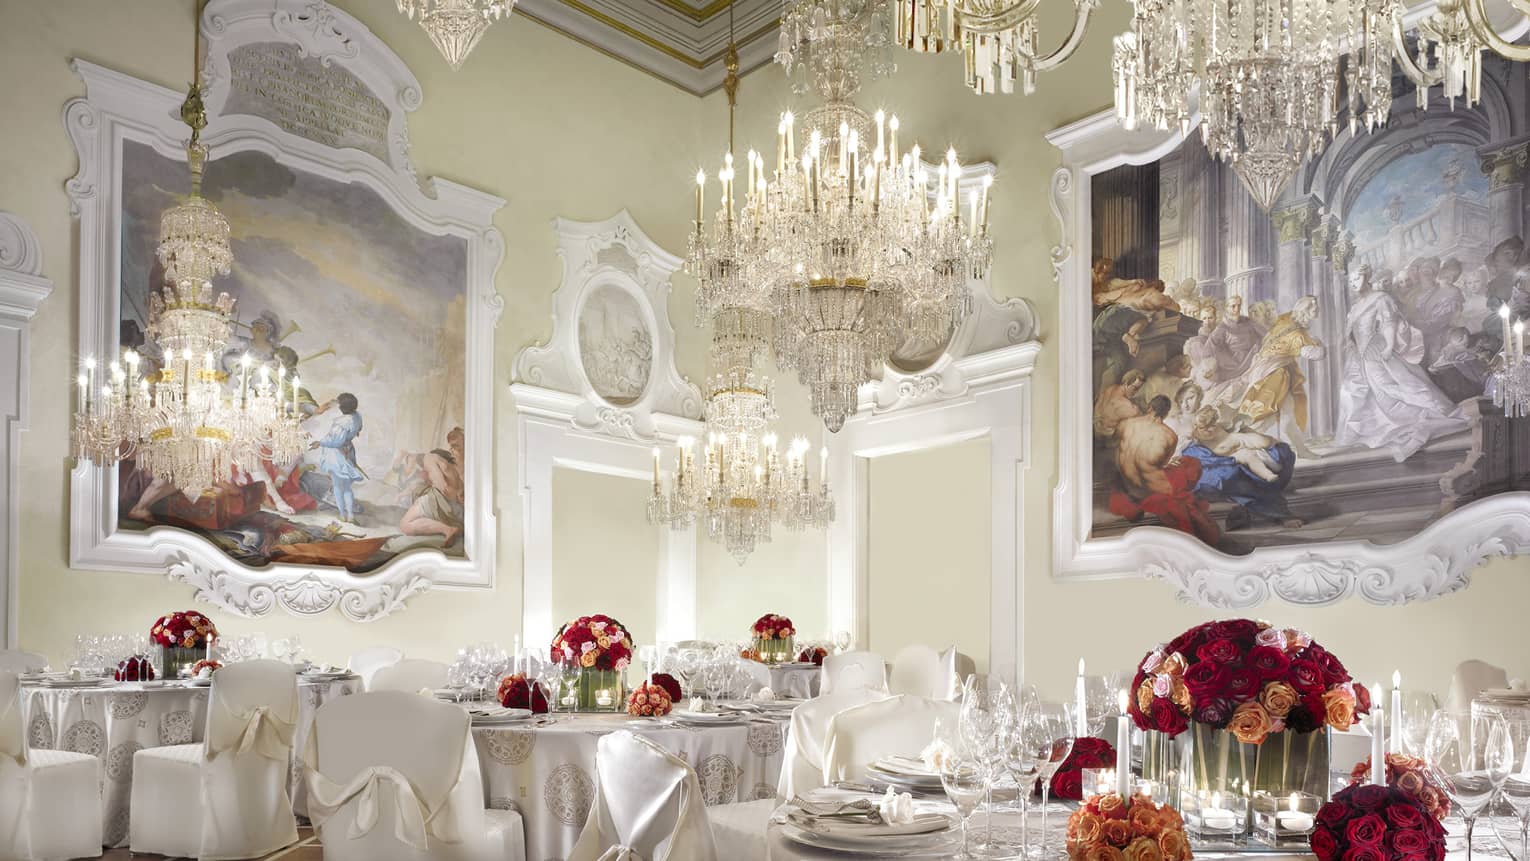 Gherardesca ballroom with large crystal chandeliers, paintings over elegant banquet tables 